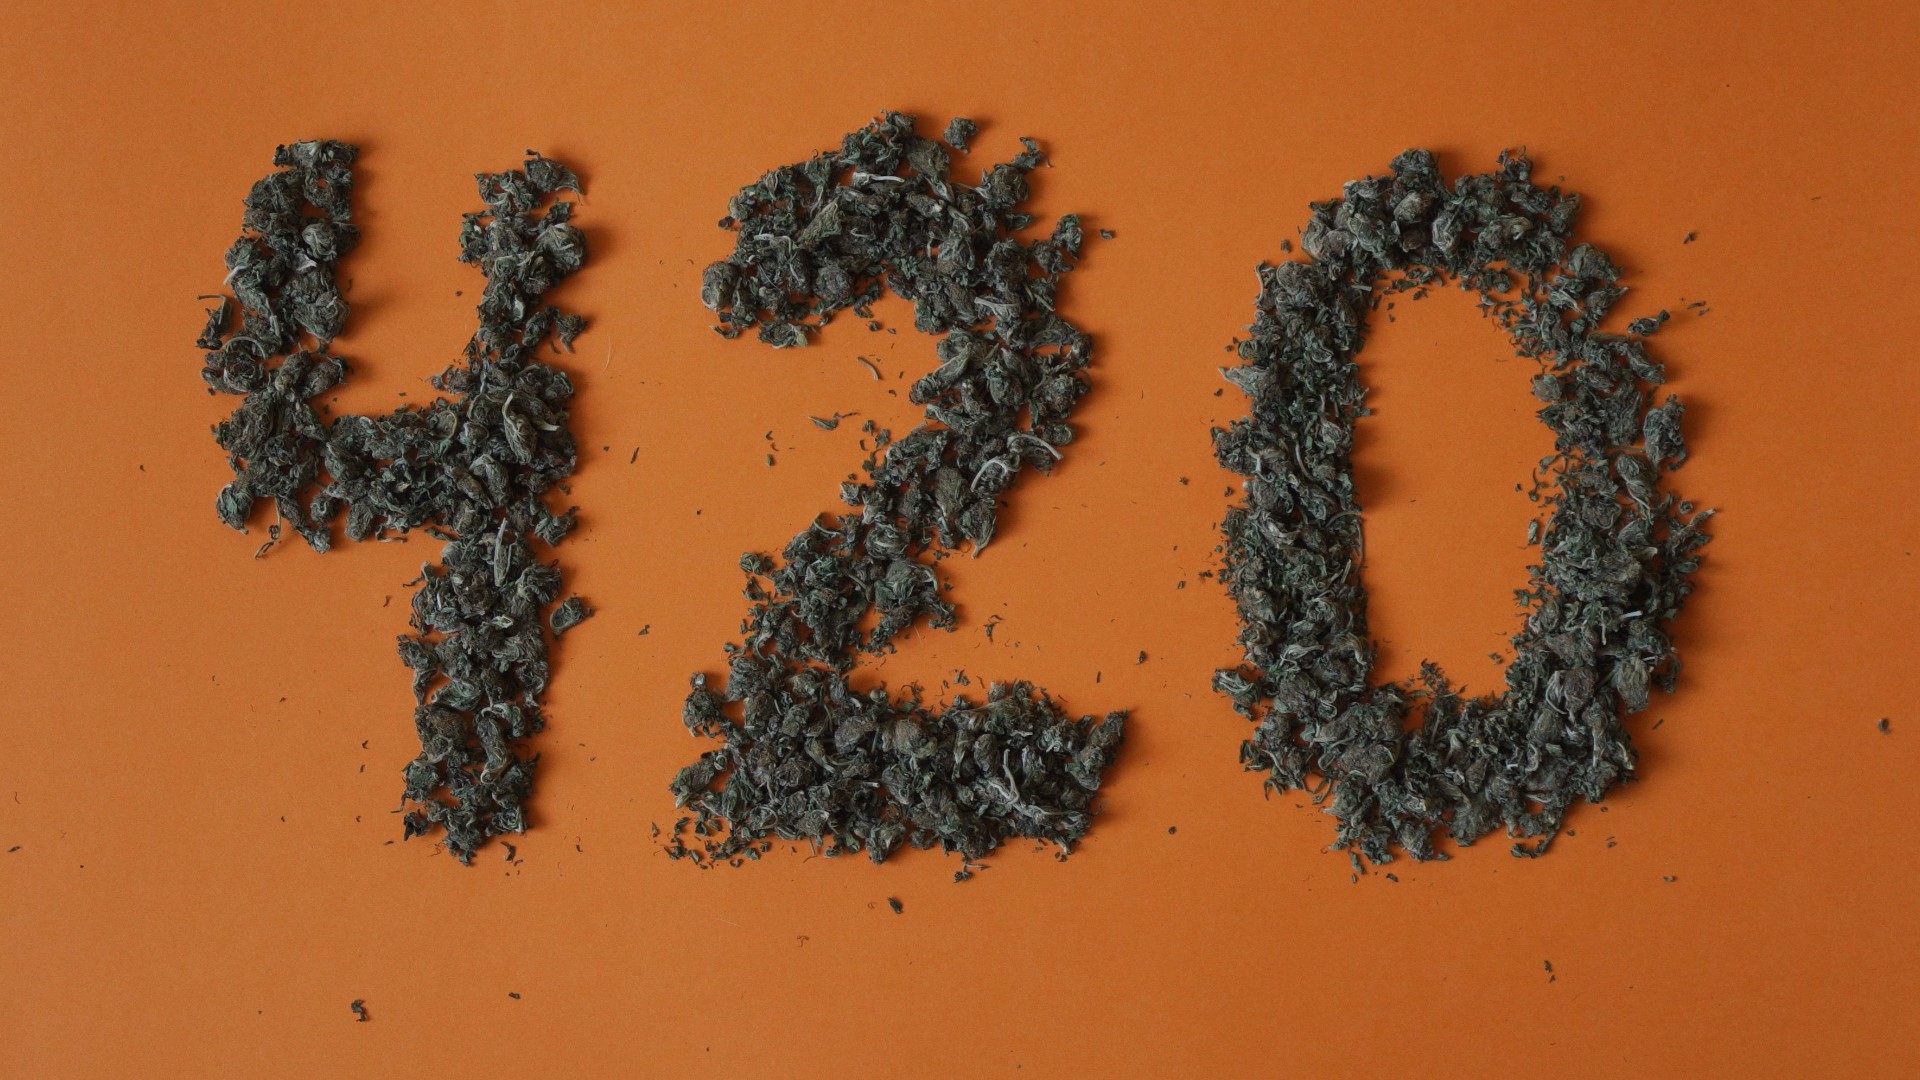 Marijuana and 420: Where did the codeword come from?